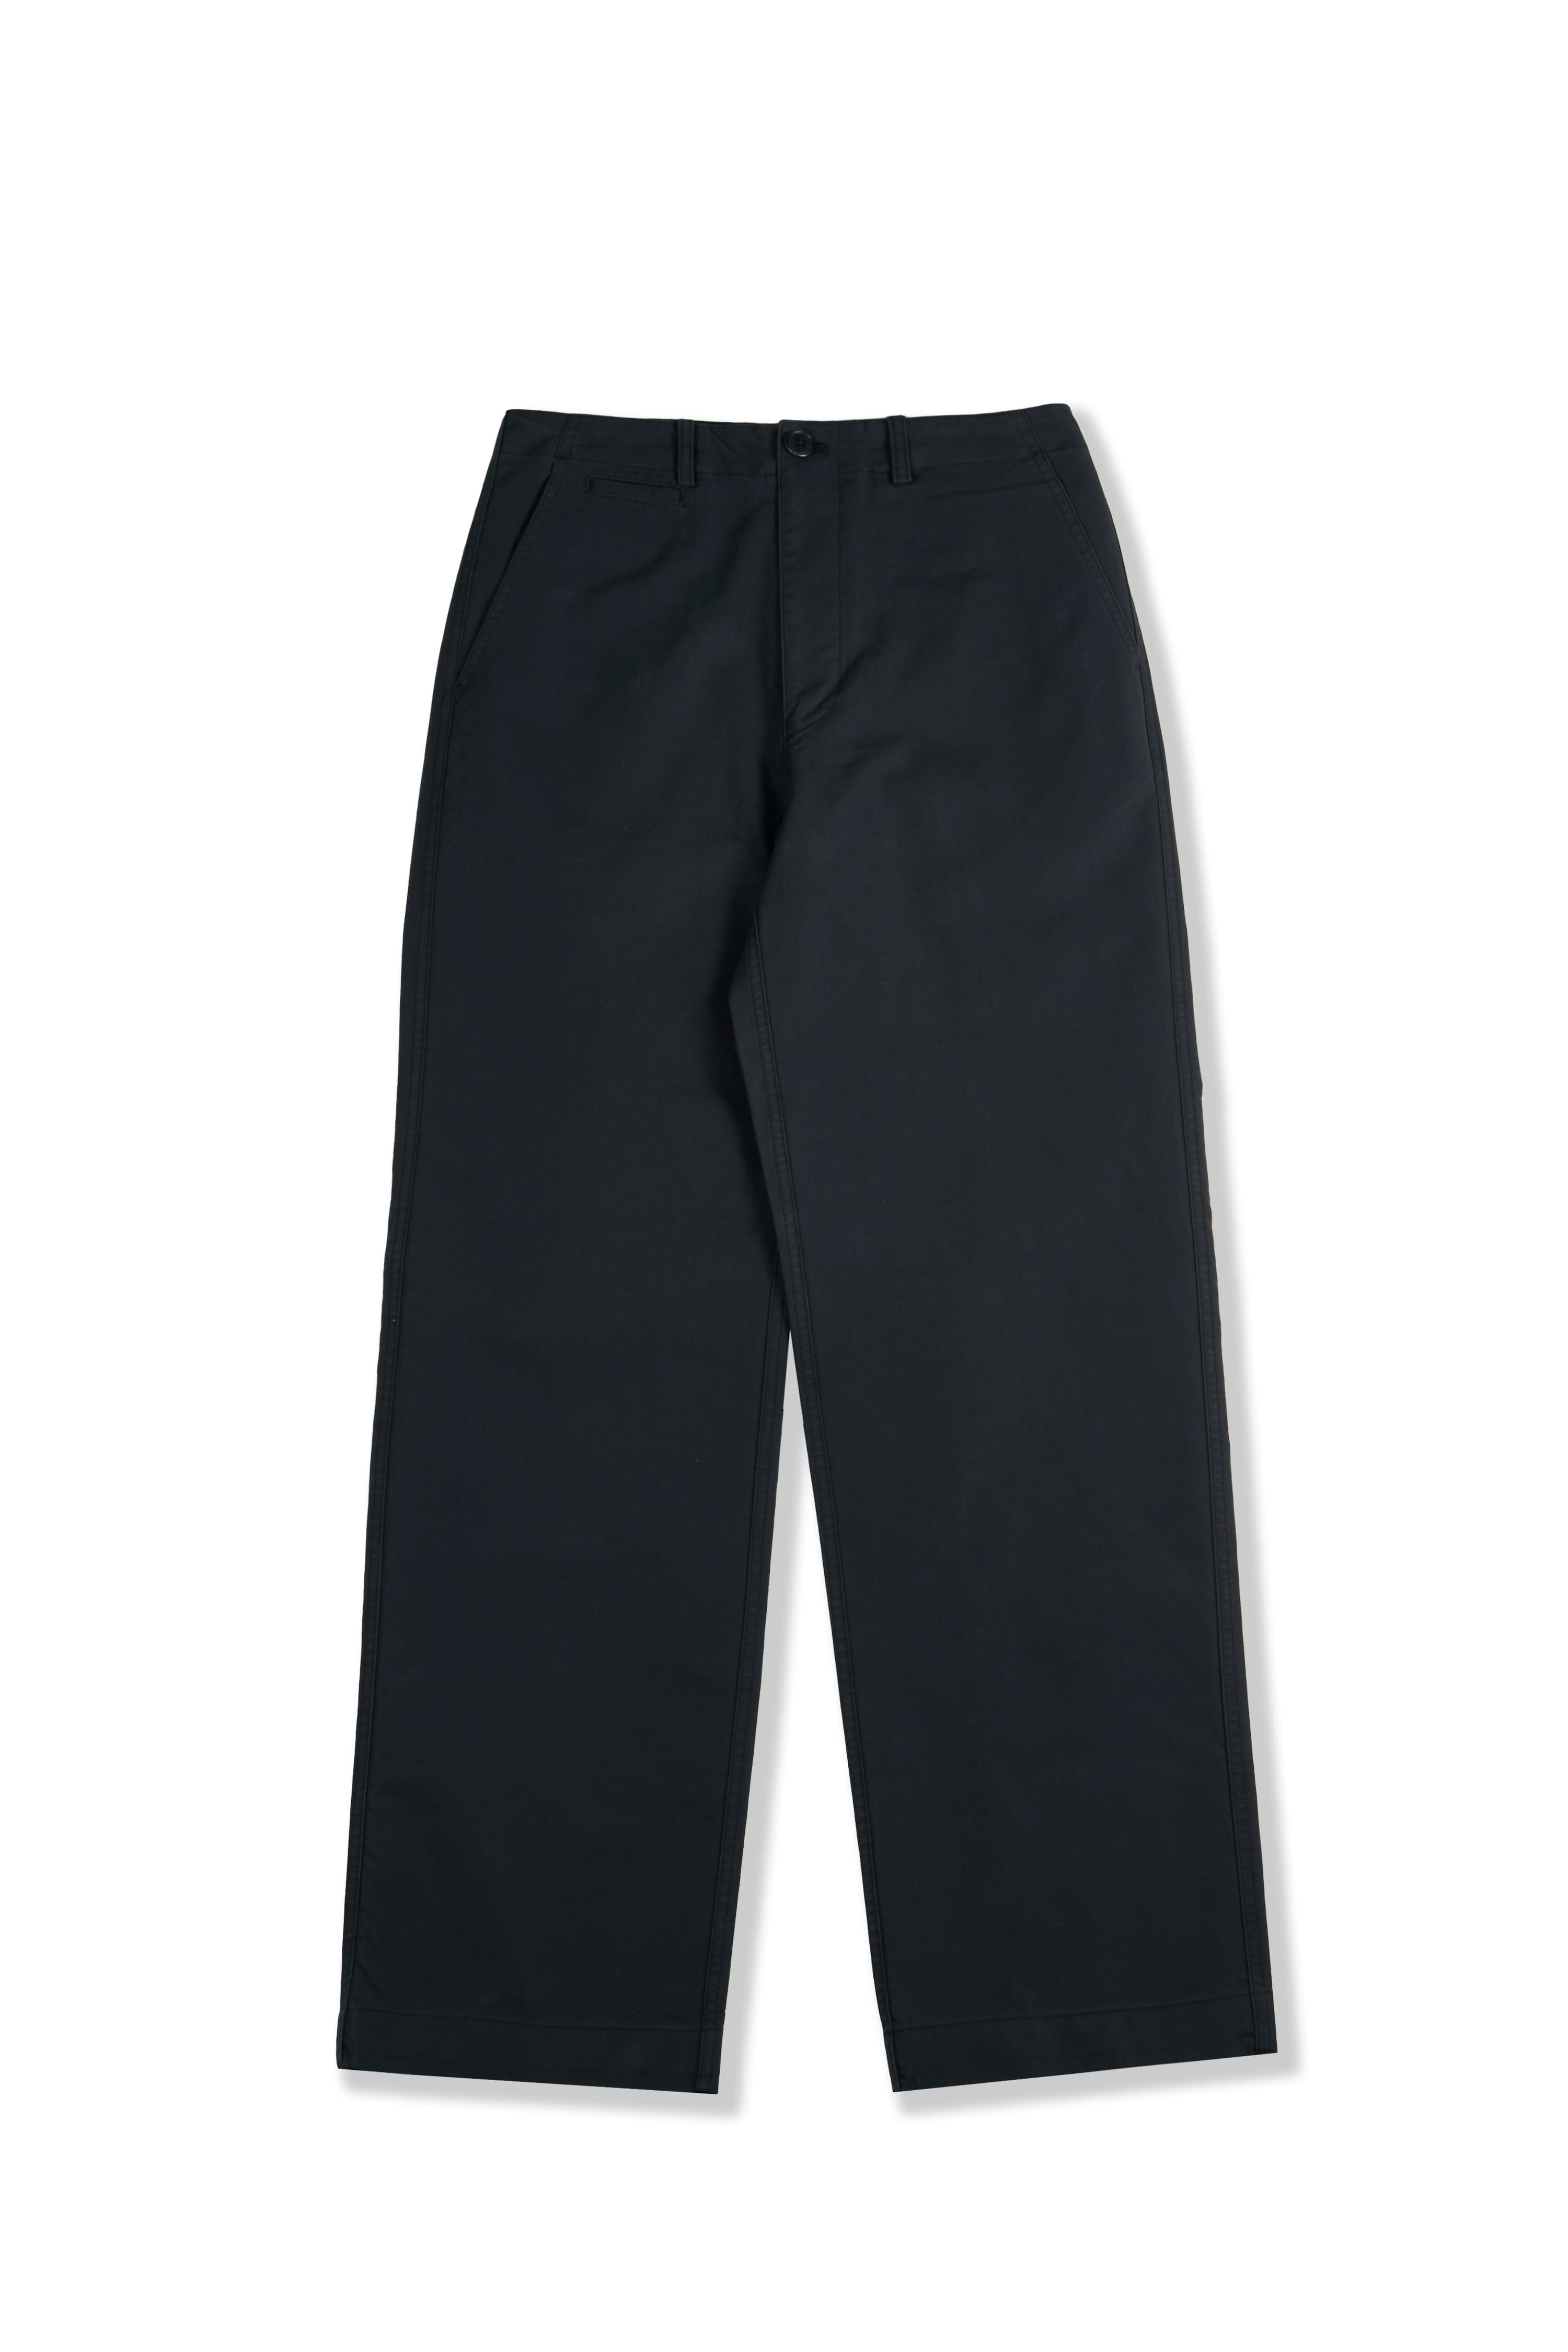 [23&#039;SPRING] chino trousers_black